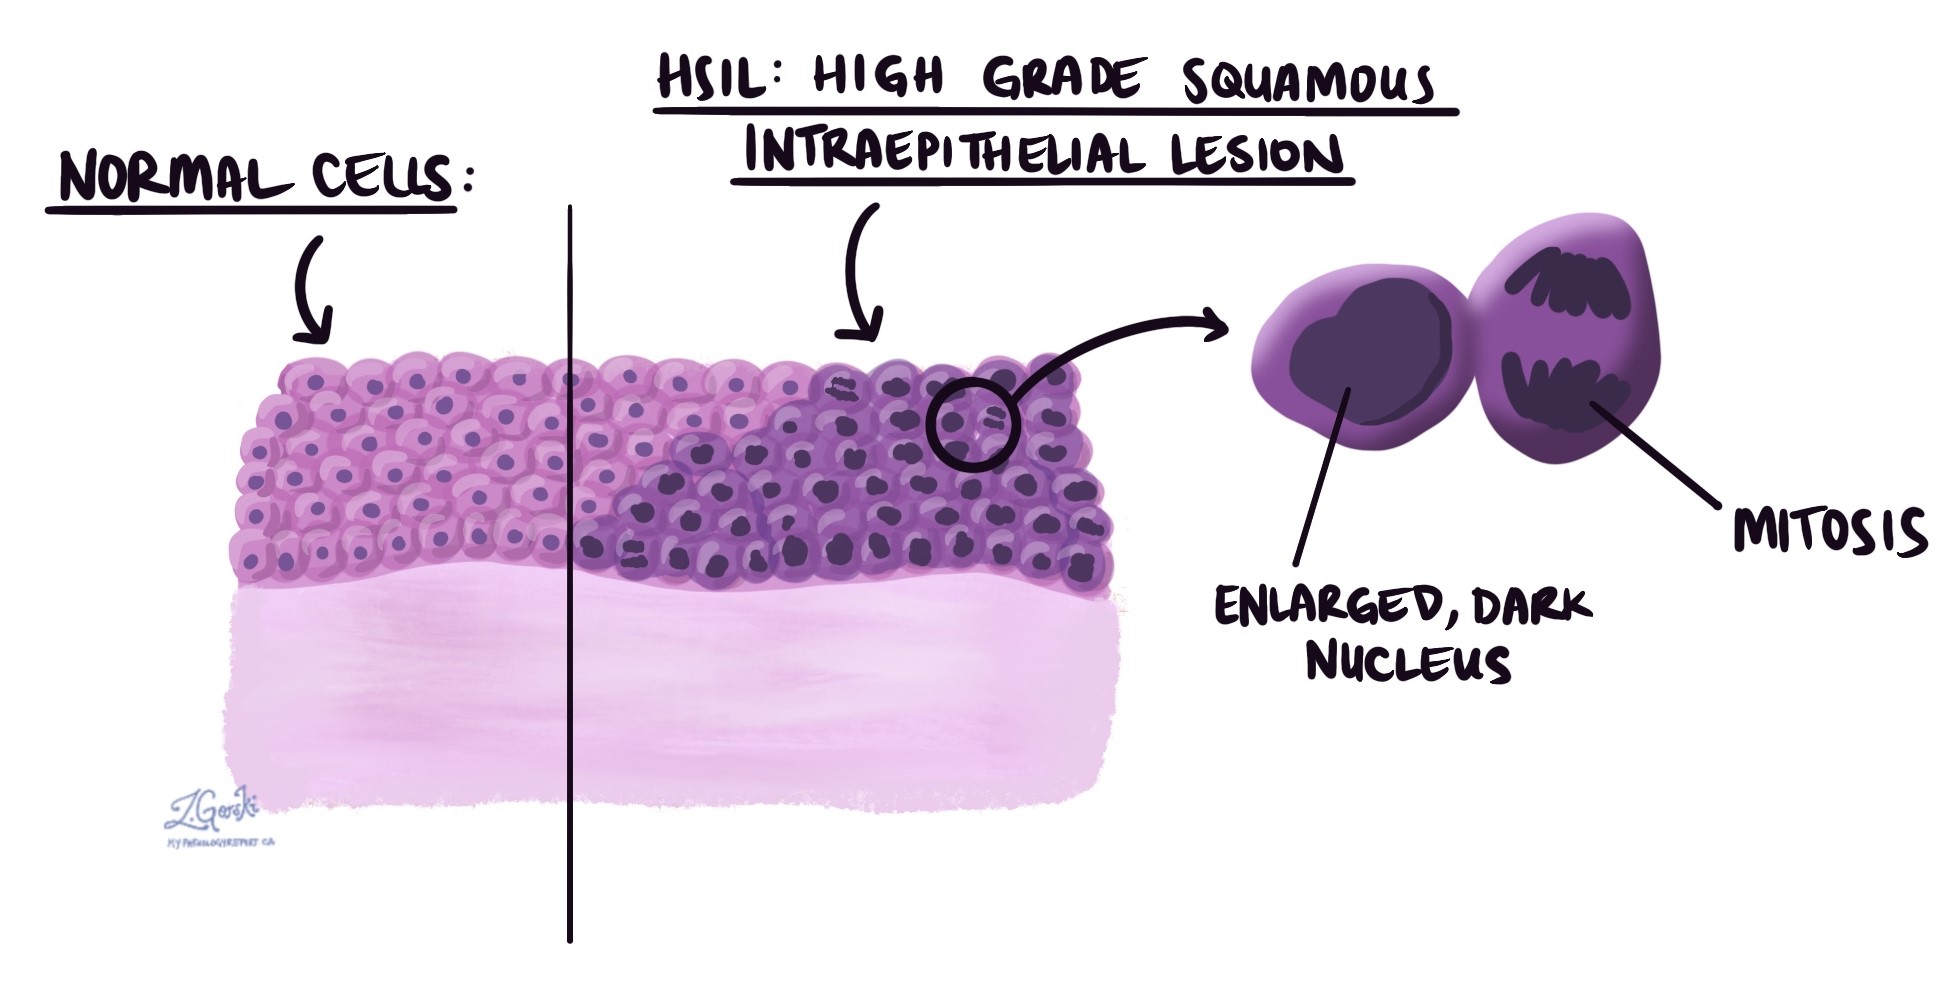 High grade squamous intraepithelial lesion